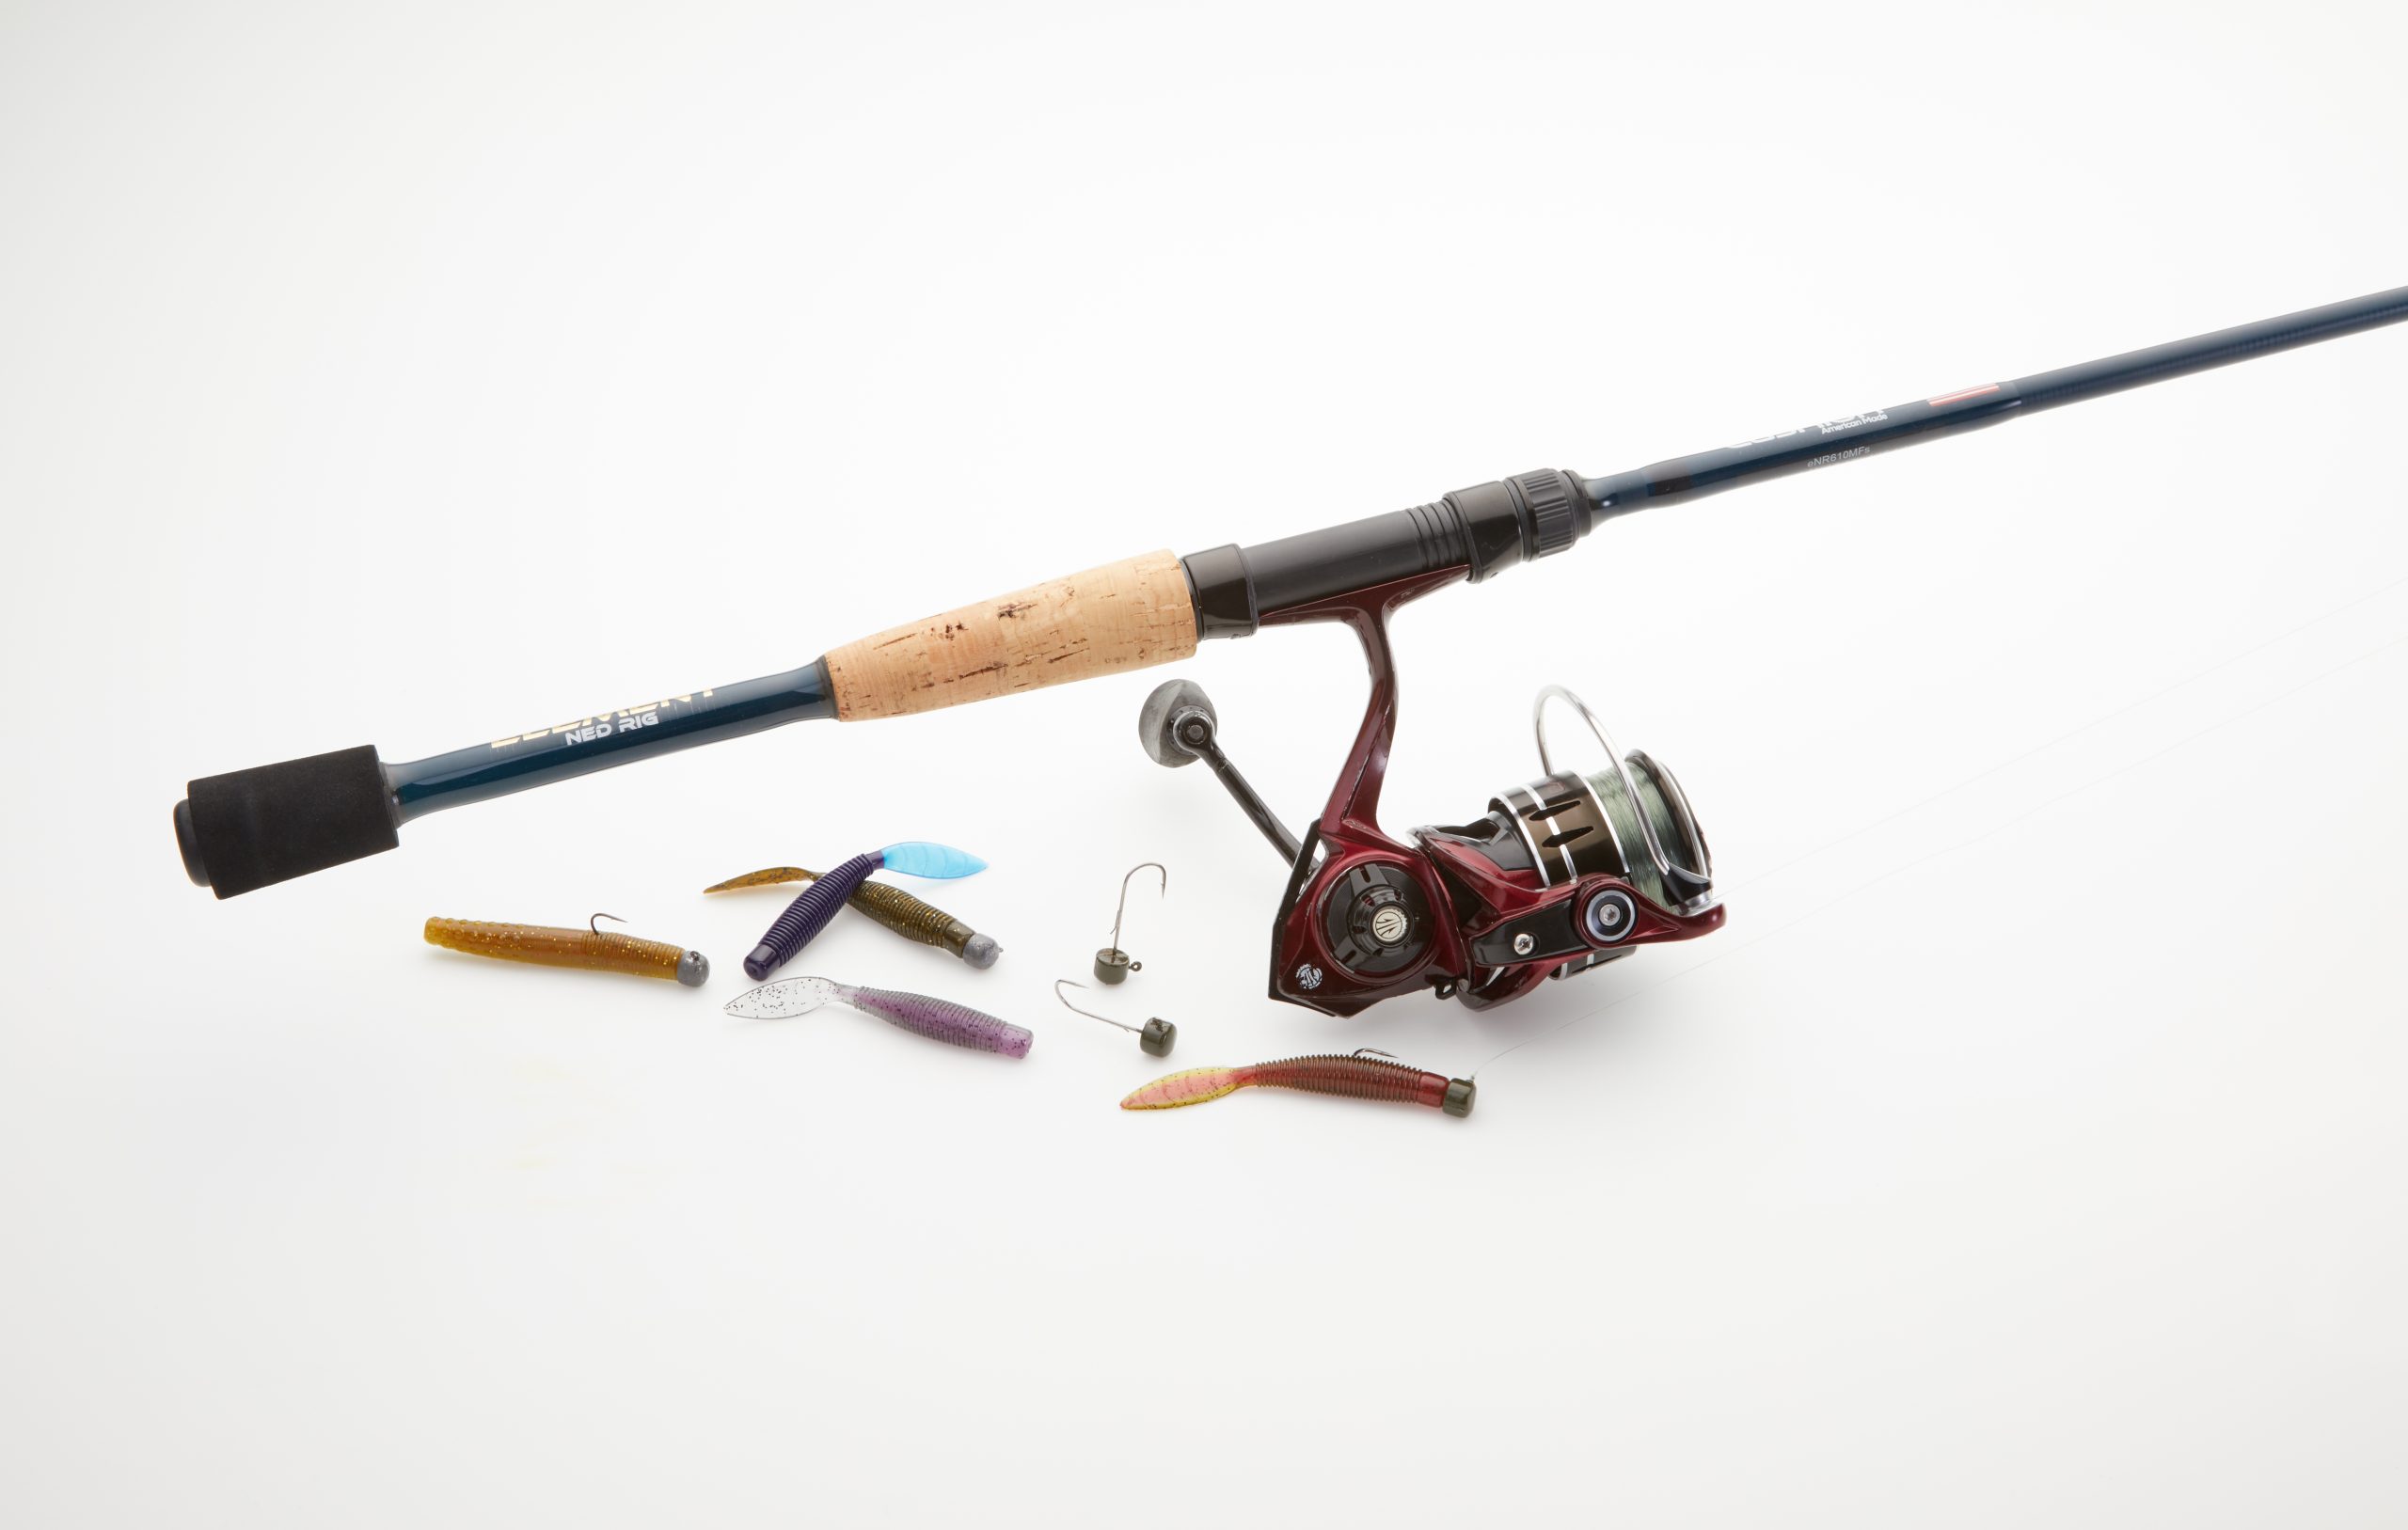 ELEMENT Ned Rig Rod - Cashion Rods